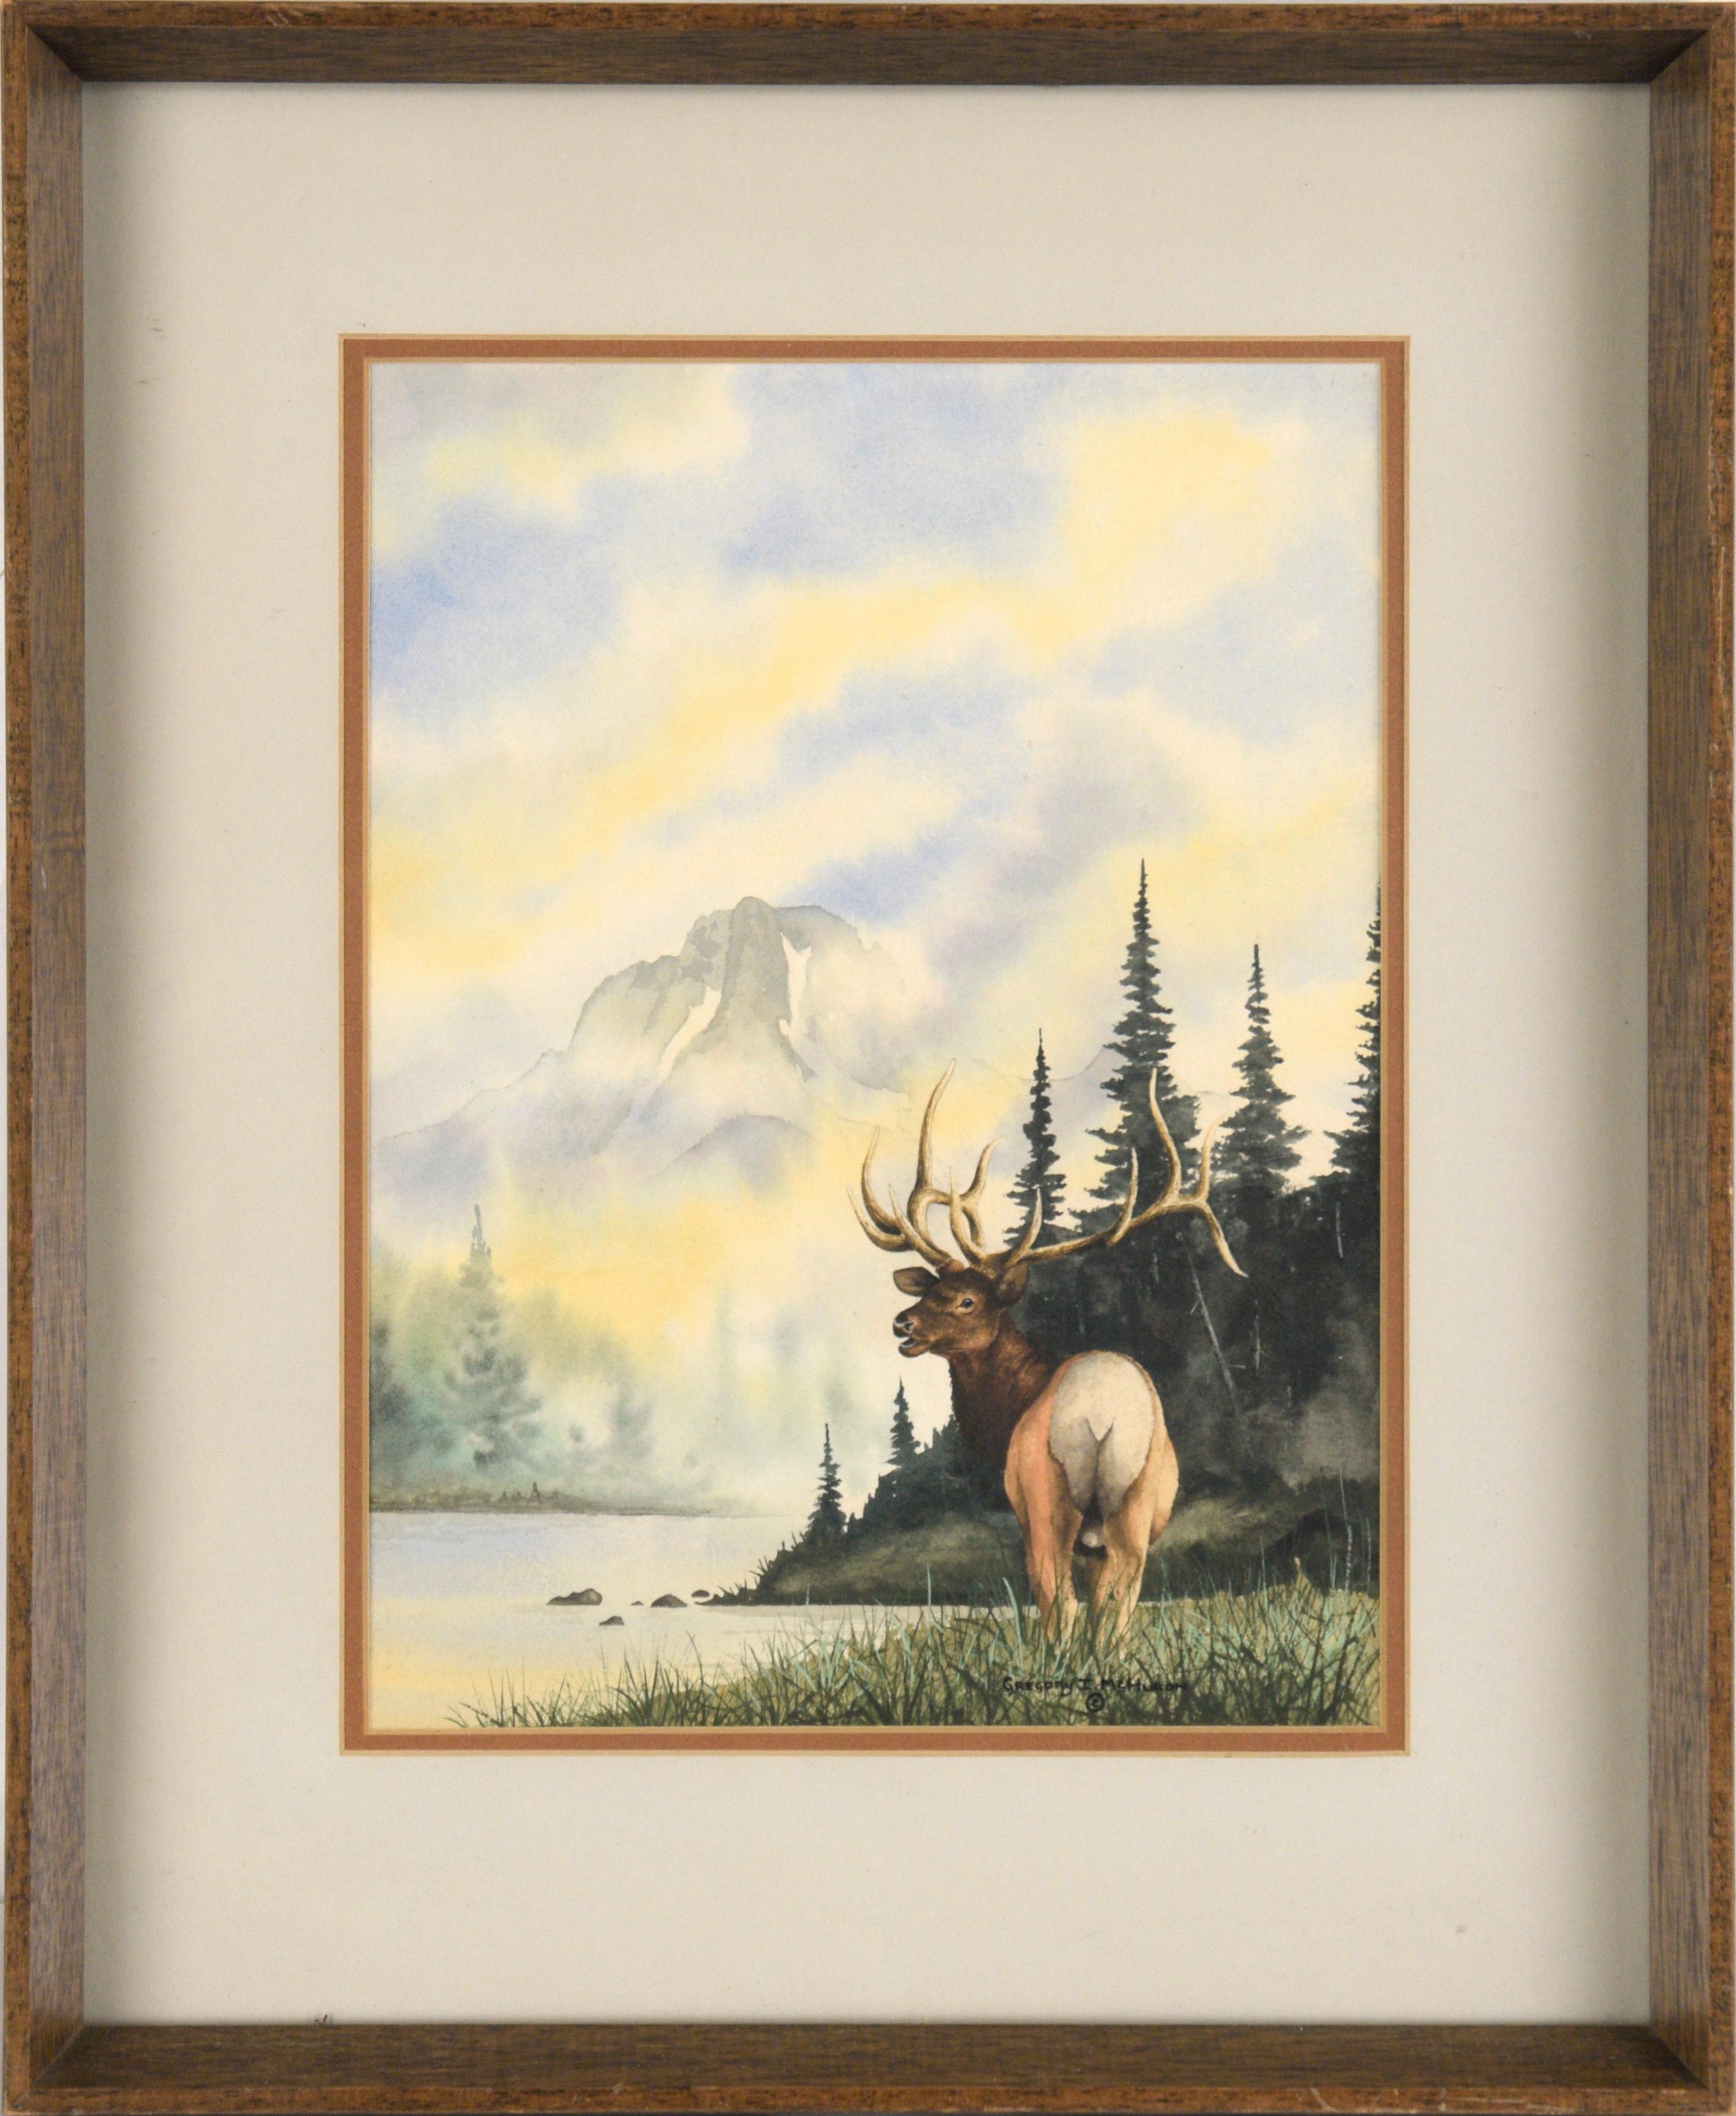 "Challenge at Dawn" - Landscape with Elk in Watercolor on Paper